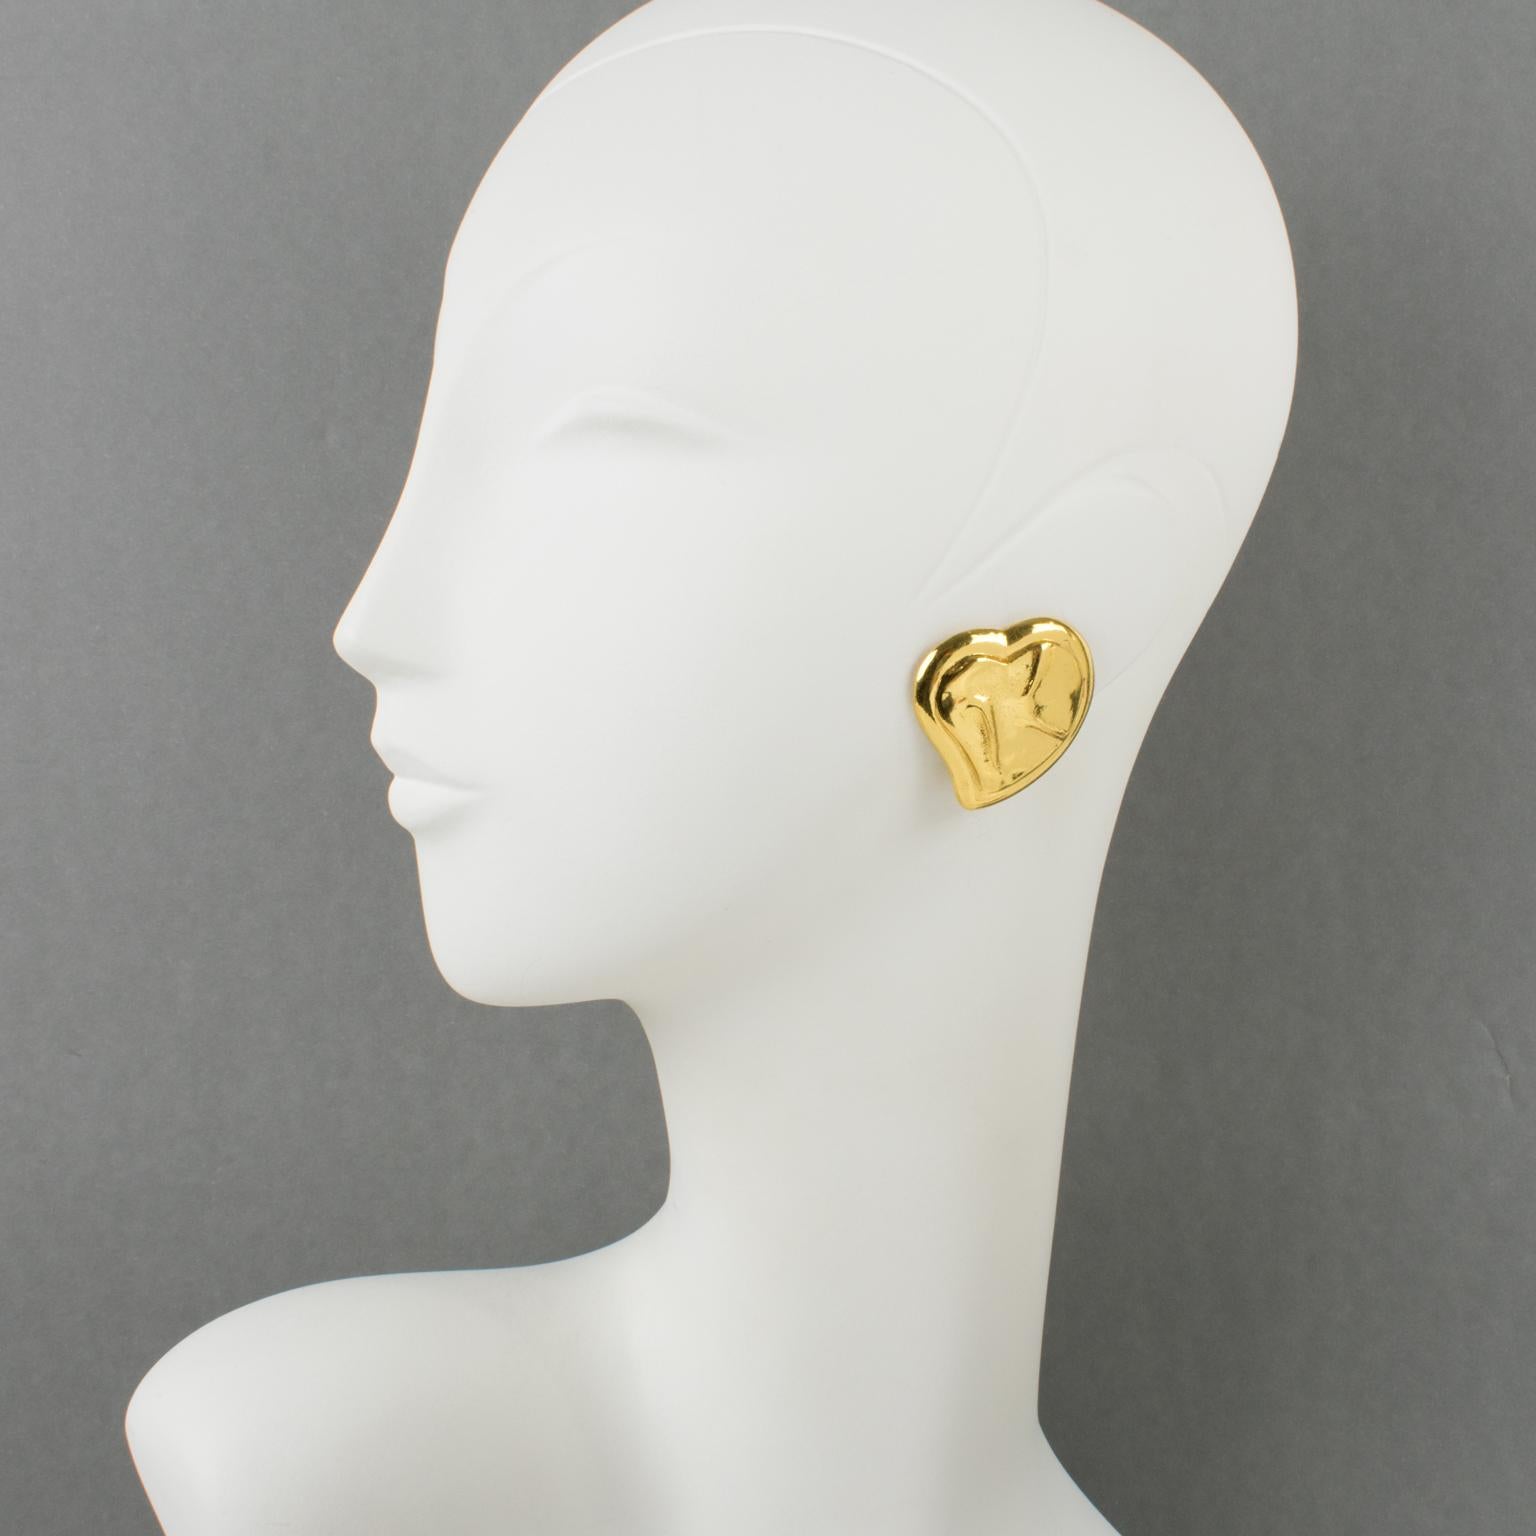 These lovely Yves Saint Laurent Paris clip-on stud earrings feature a romantic dimensional heart shape with carving in shiny gilt metal. They are signed at the back with the YSL pierced logo on the clip and the Made in France mark engraved on the